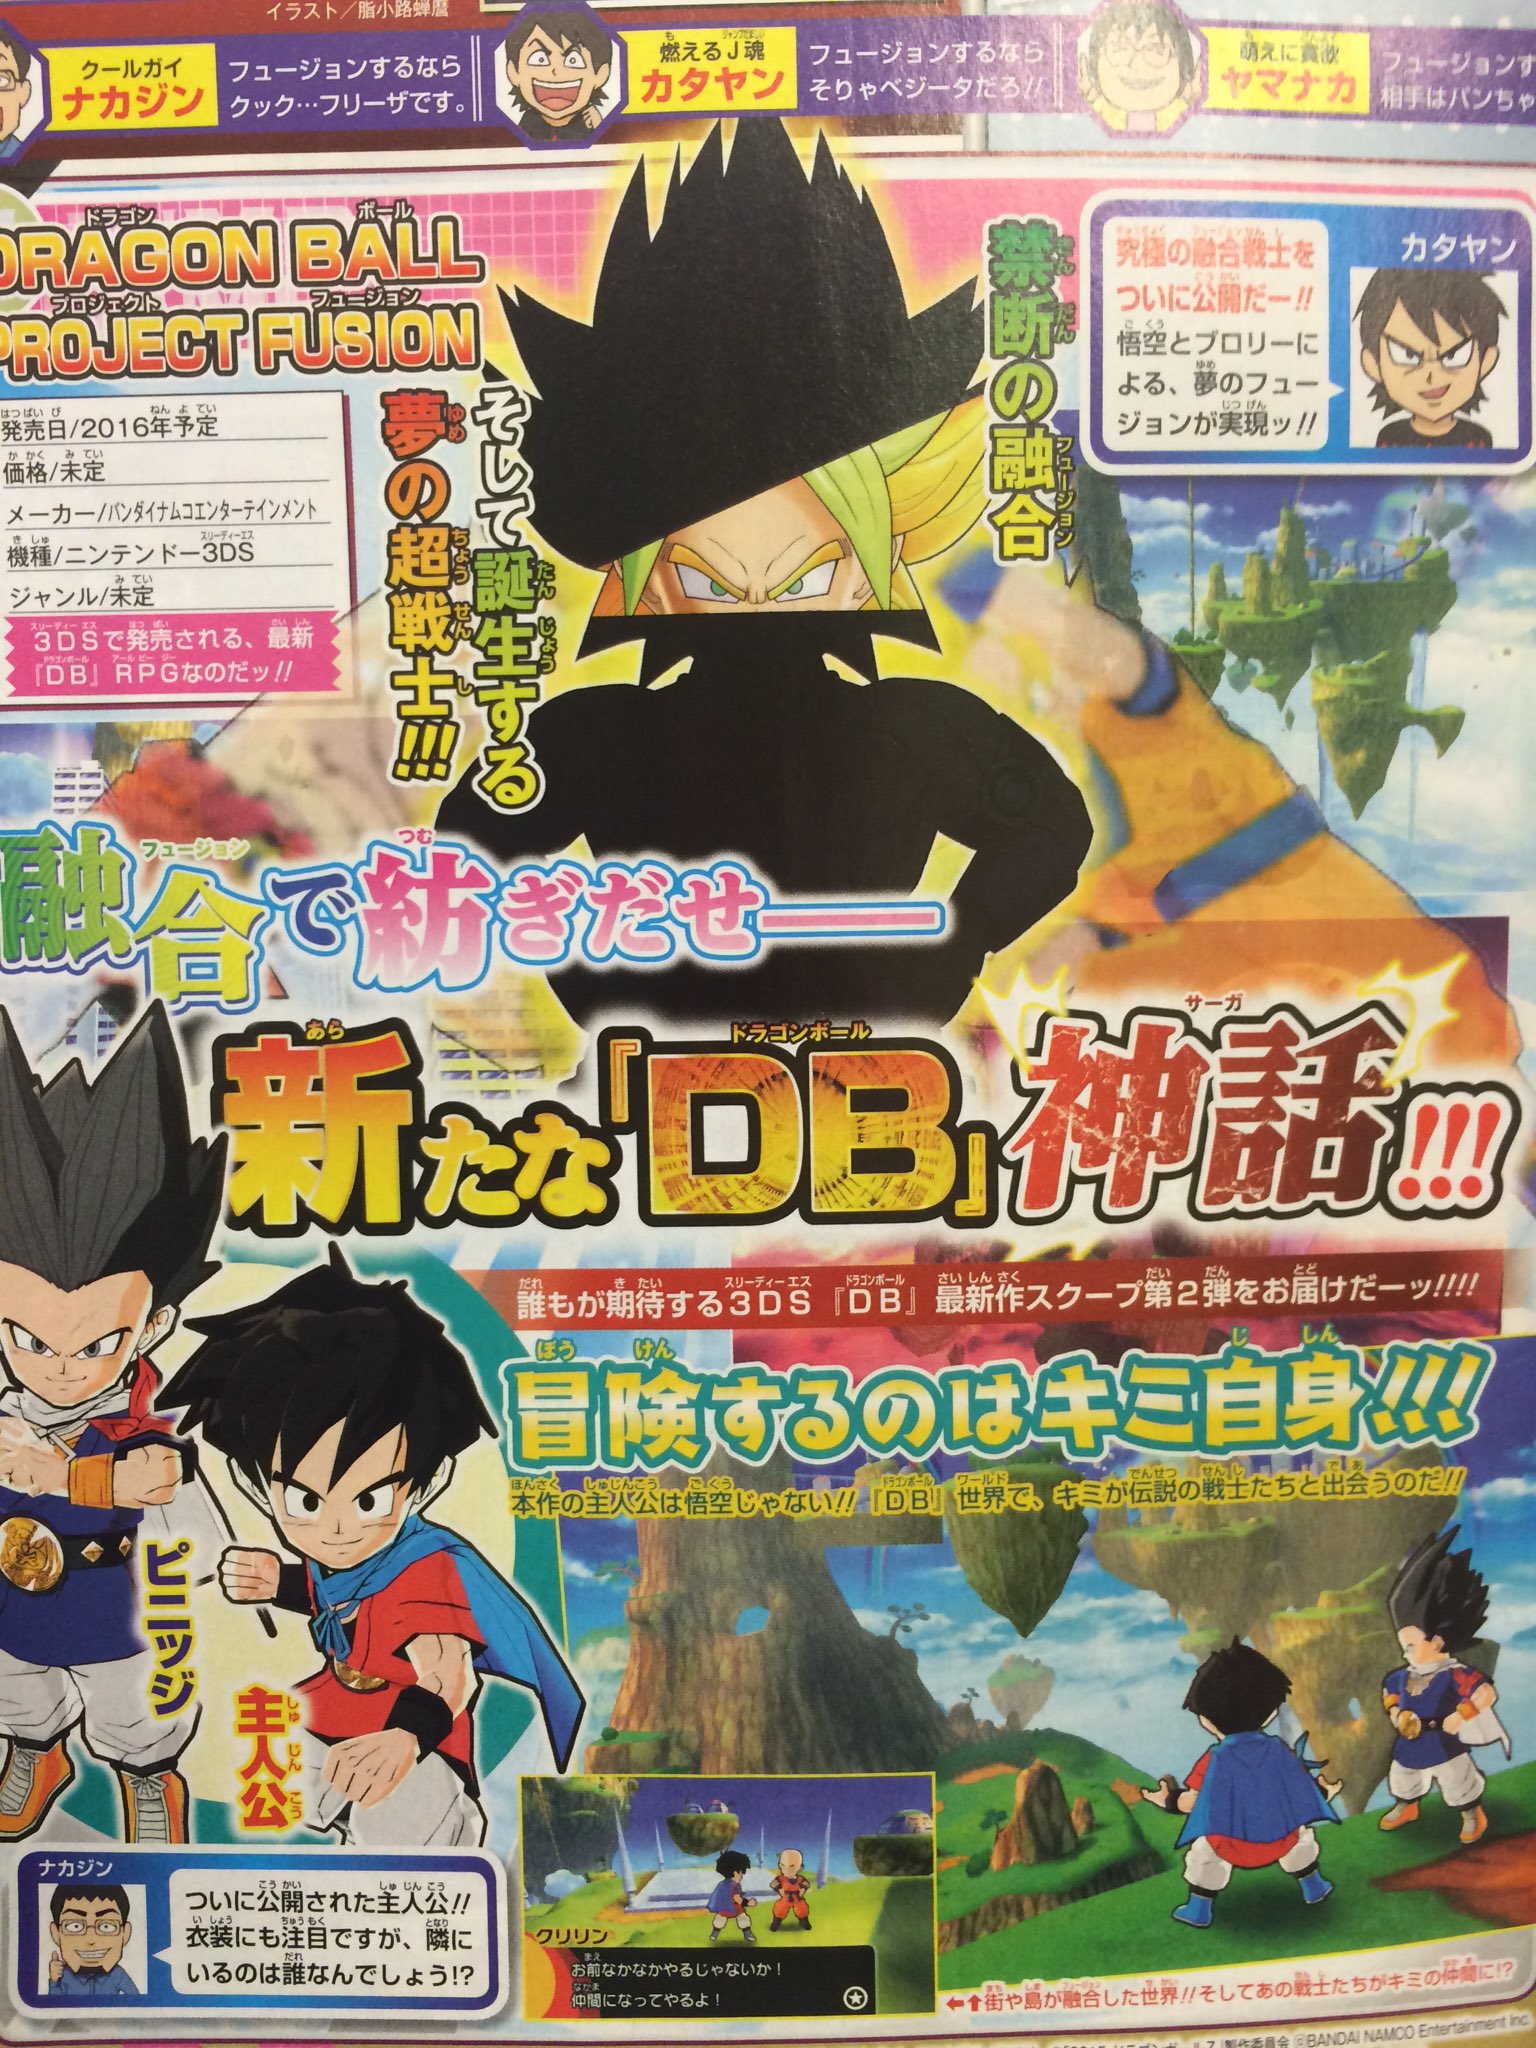 Dragon Ball: Project Fusion will have an original ...